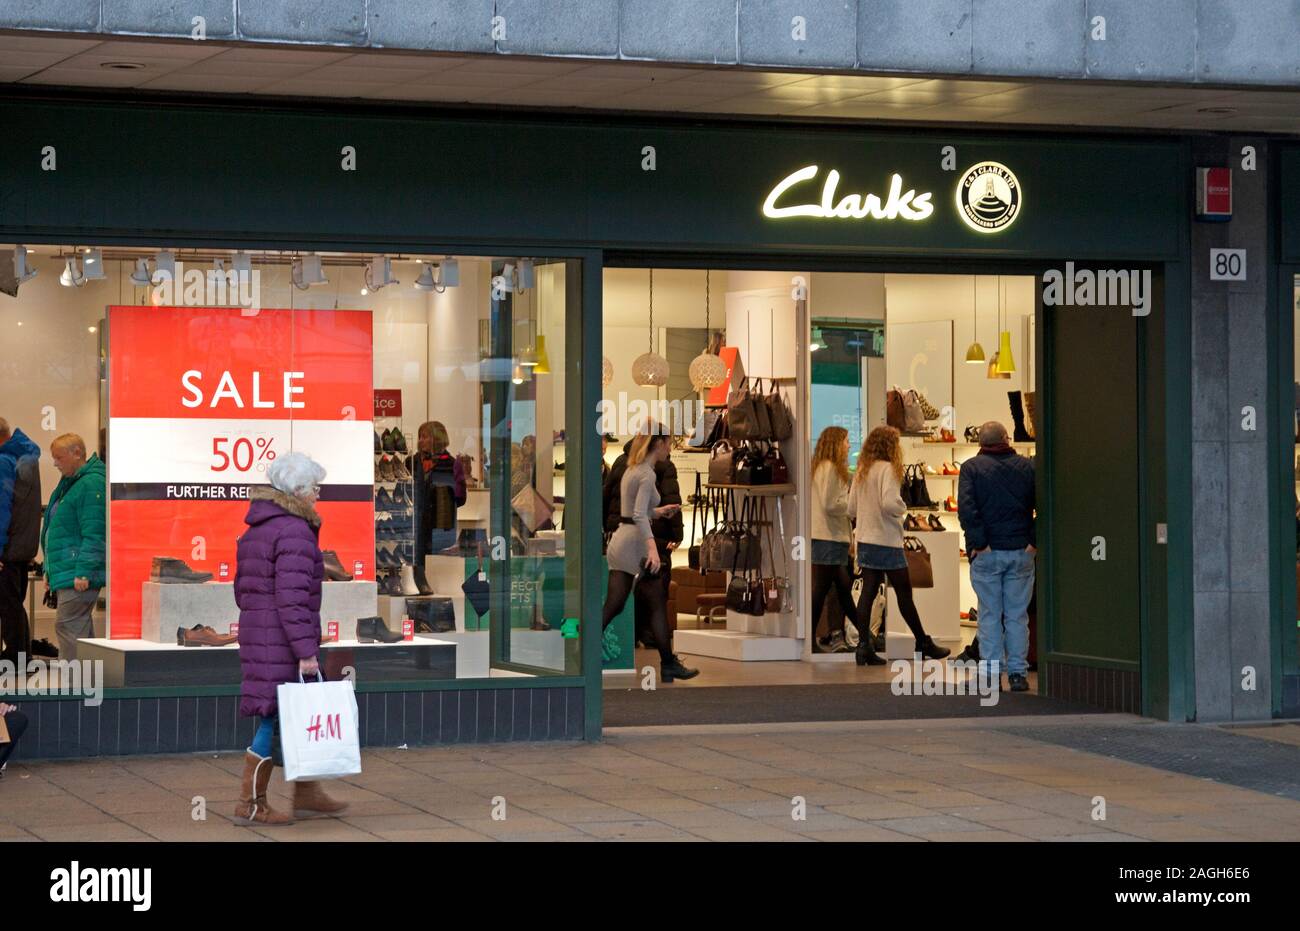 Princes Street, Edinburgh, Scotland, UK. 19th 2019. Clarks. less than a week to go until Christmas day the majority of the stores in Princes Street are displaying Sale signs with